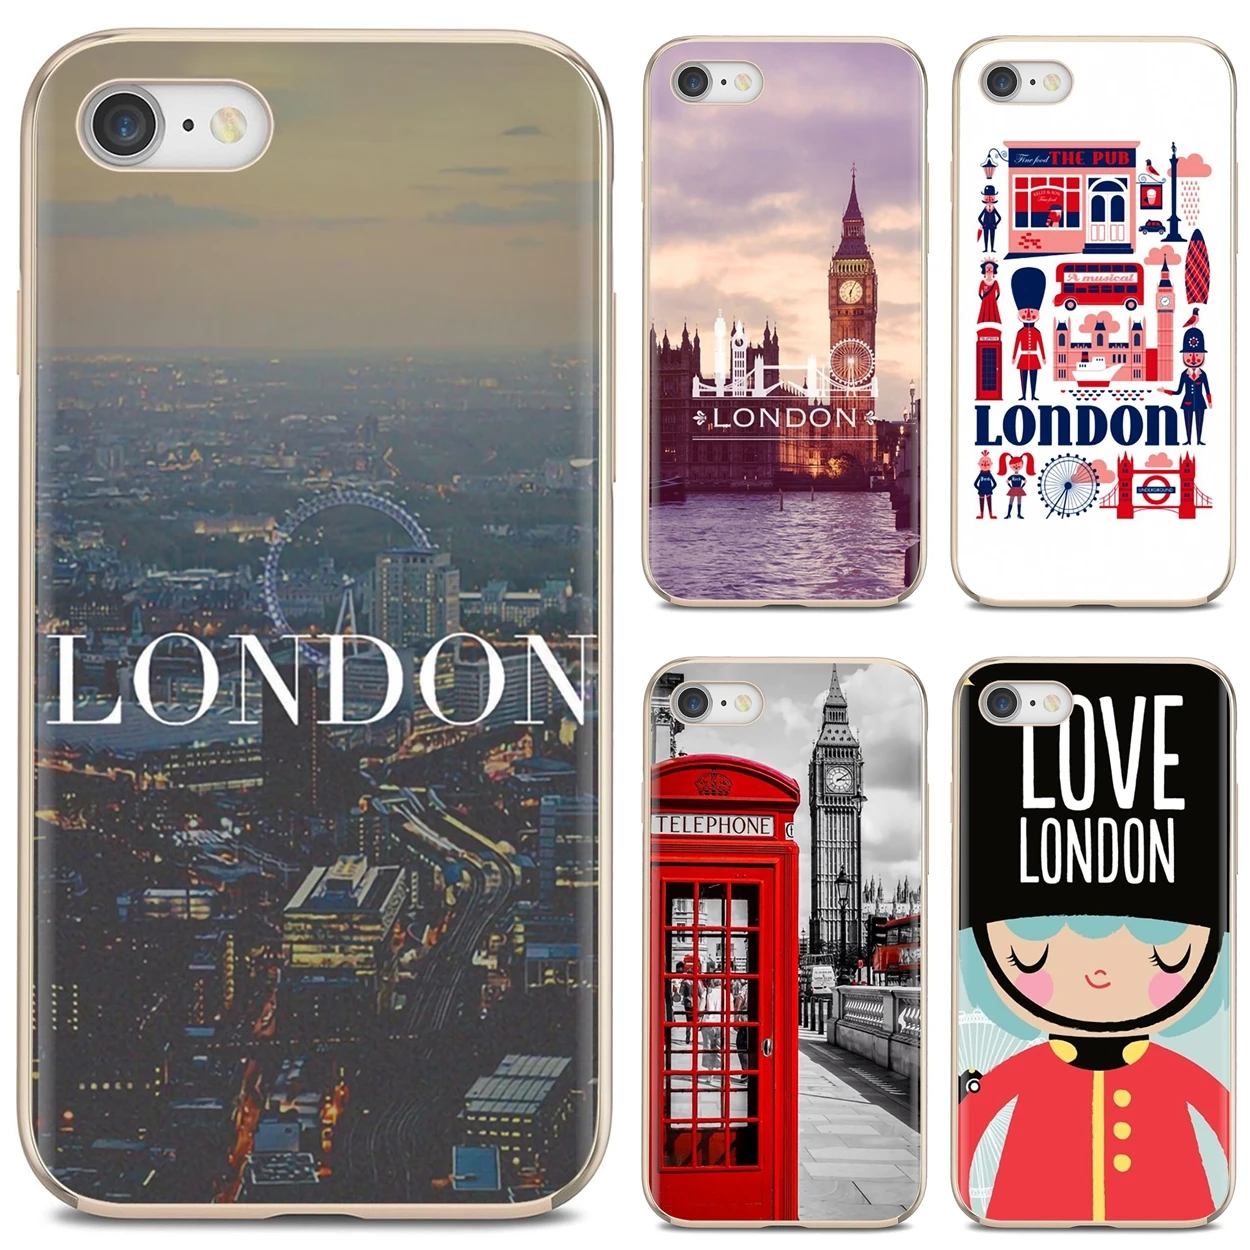 

London big ben Bus Cell For iPod Touch For iPhone 11 Pro 4 4S 5 5S SE 5C 6 6S 7 8 X XR XS Plus Max Soft TPU Silicone Case